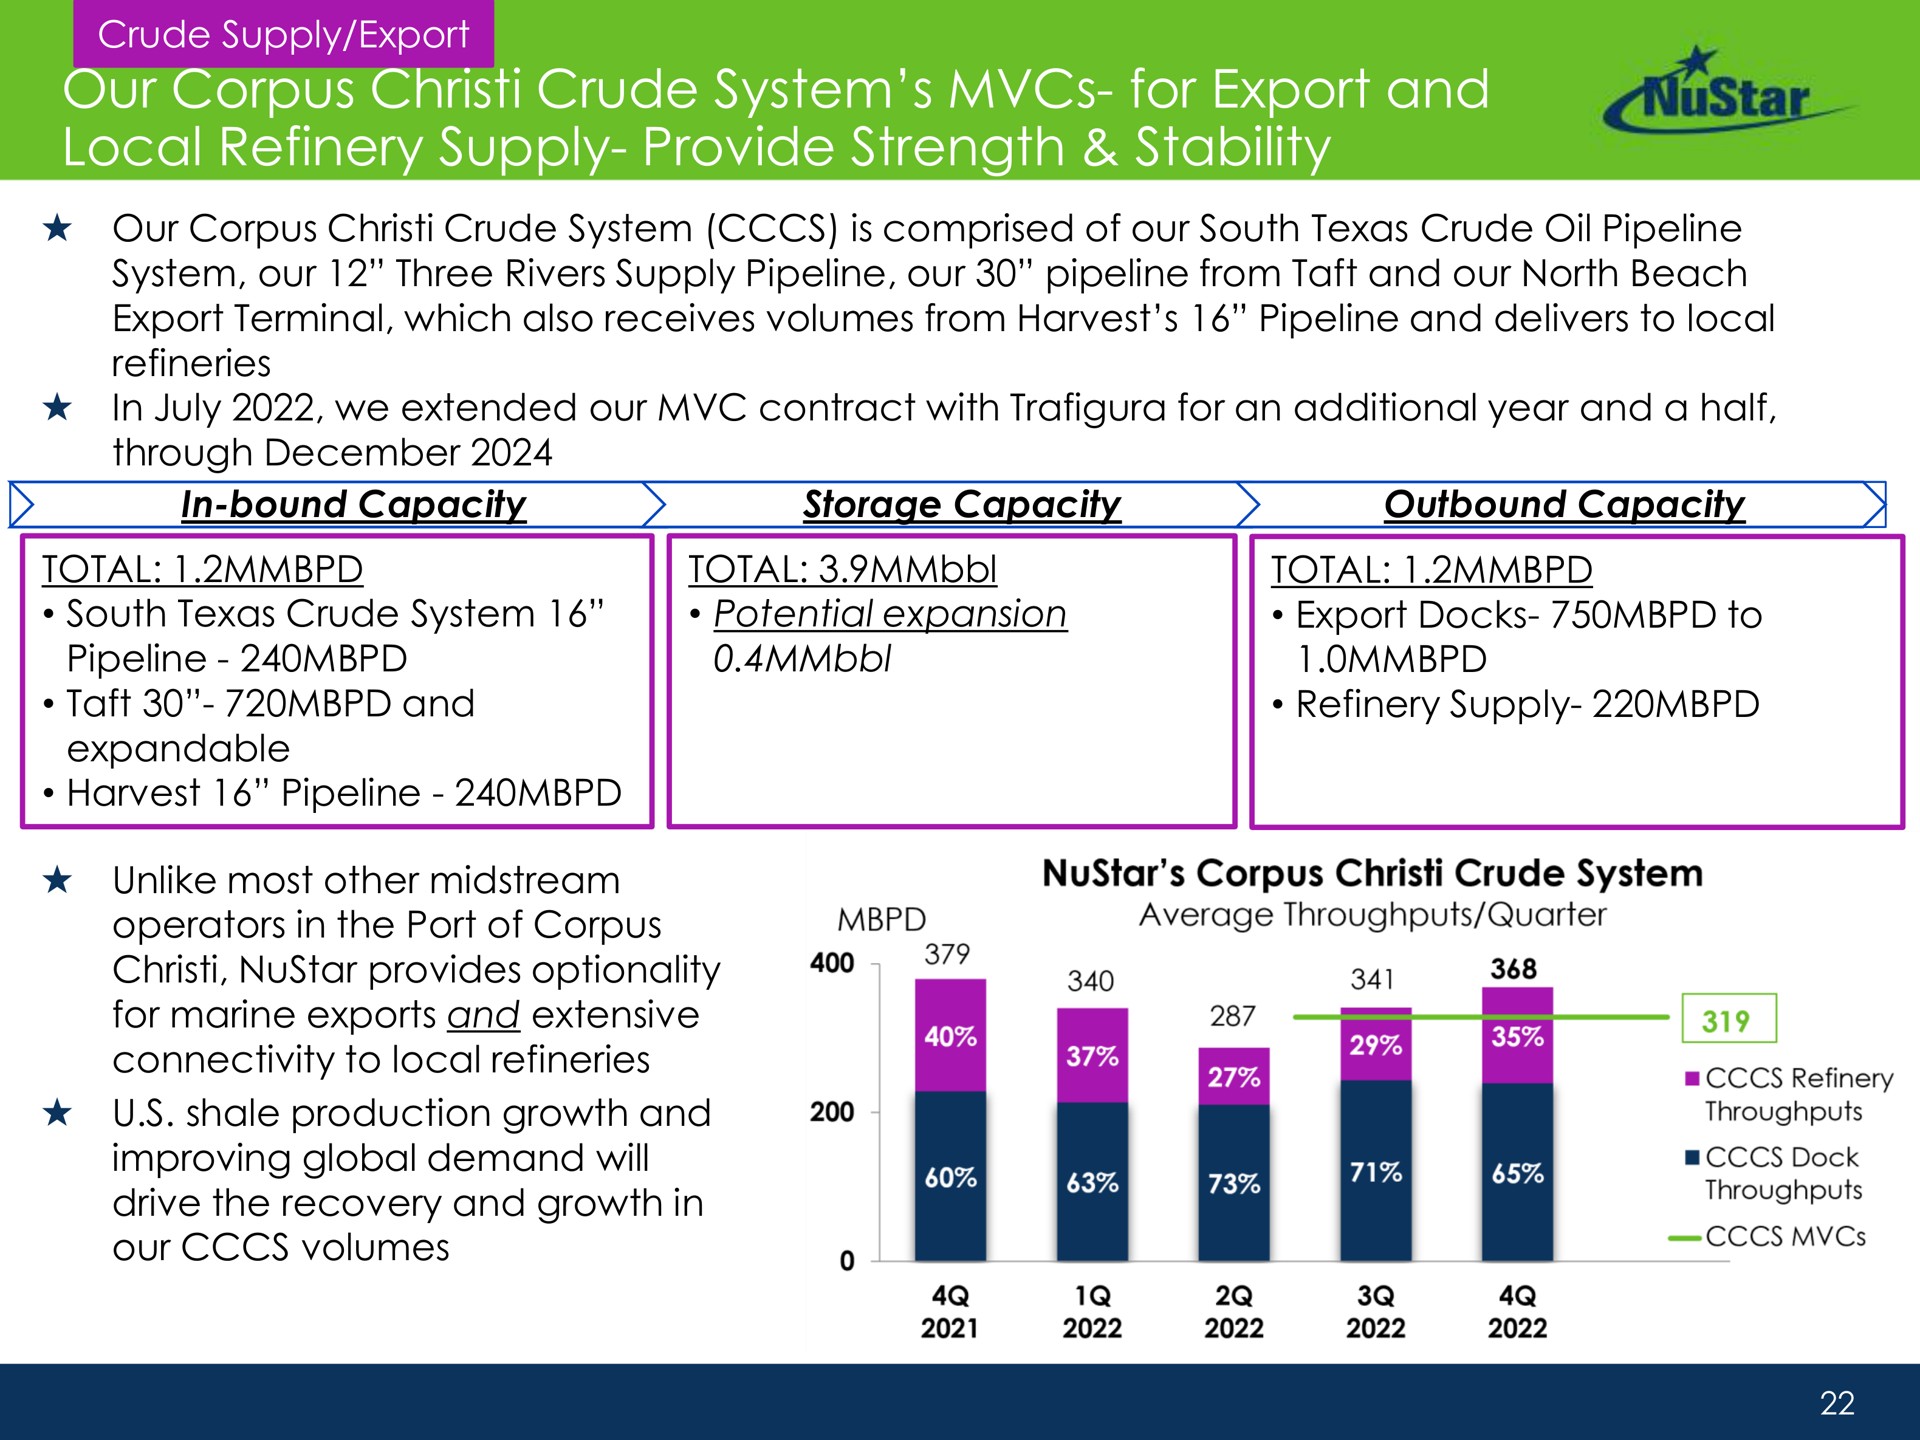 our corpus crude system for export and local refinery supply provide strength stability operators in the port of drive the recovery growth in volumes average throughputs quarter throughputs | NuStar Energy